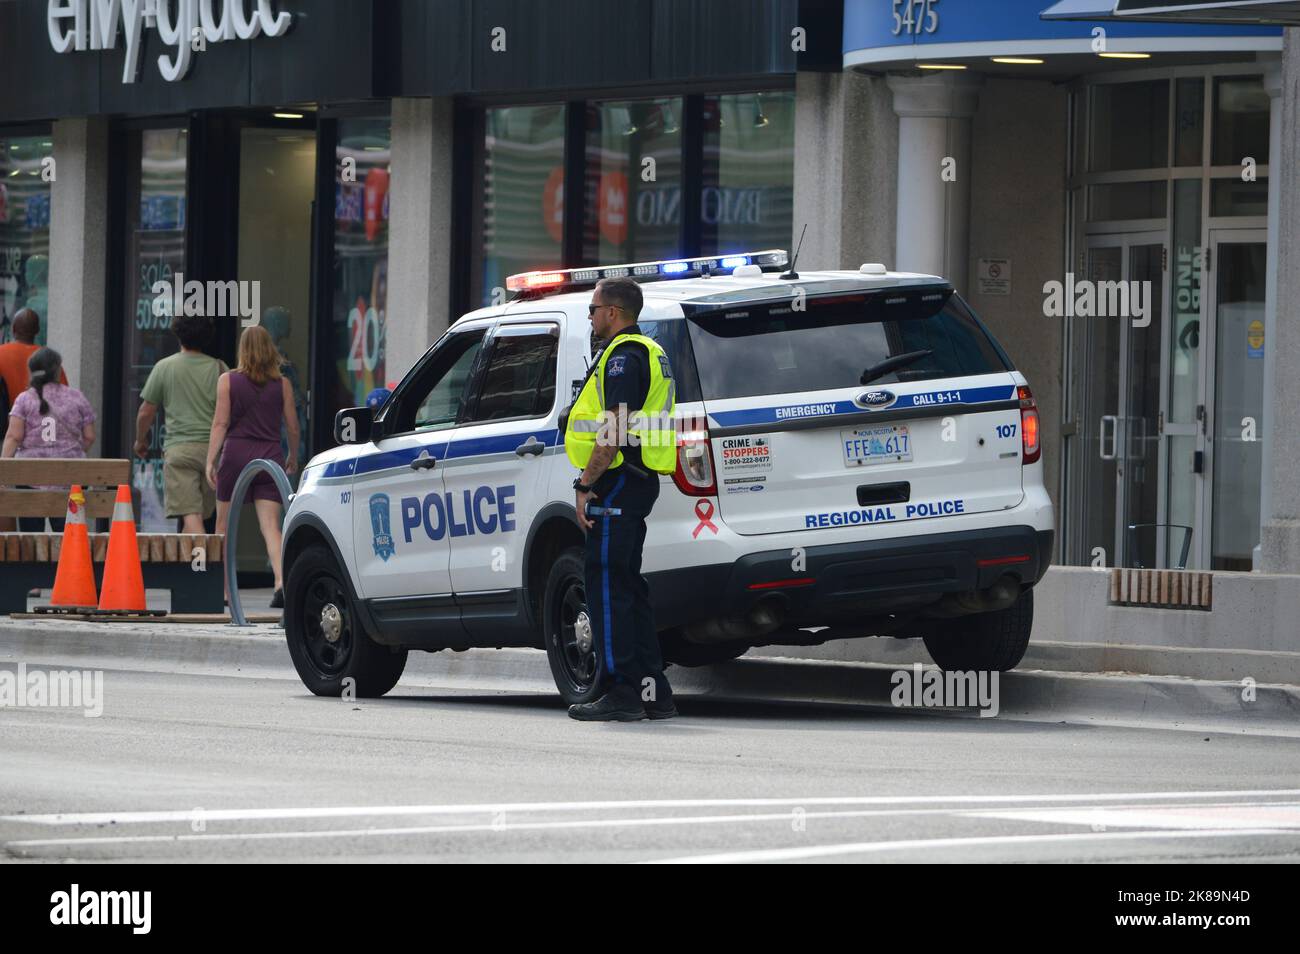 Halifax Regional Police officer and vehicle on Spring Garden Road shopping street in Halifax, Nova Scotia, Canada Stock Photo